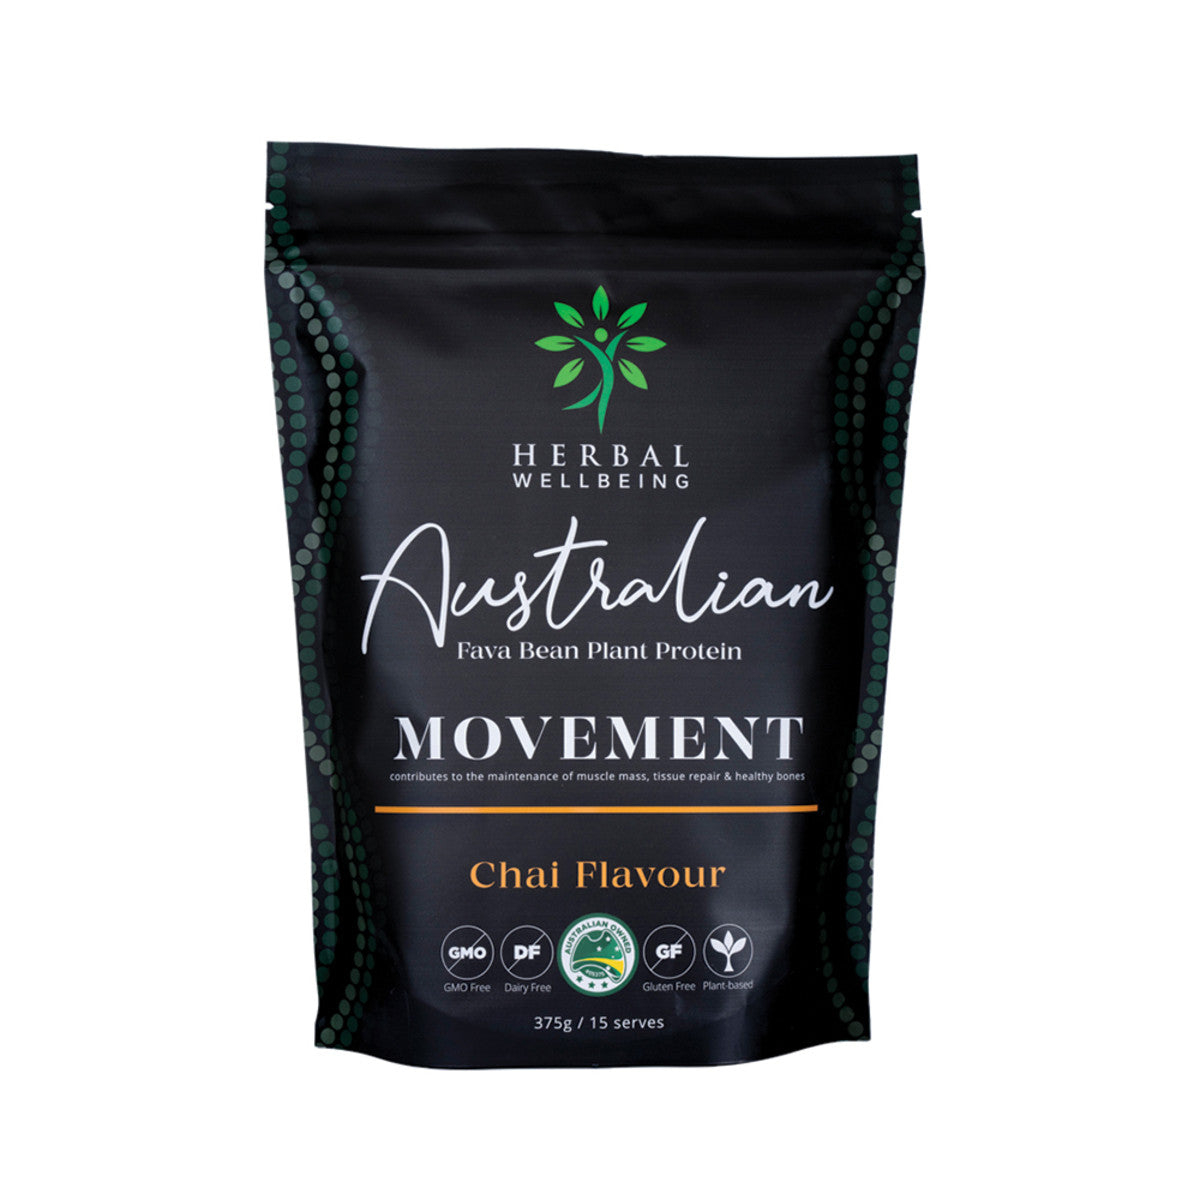 Herbal Wellbeing - Plant Protein Movement (Chai)